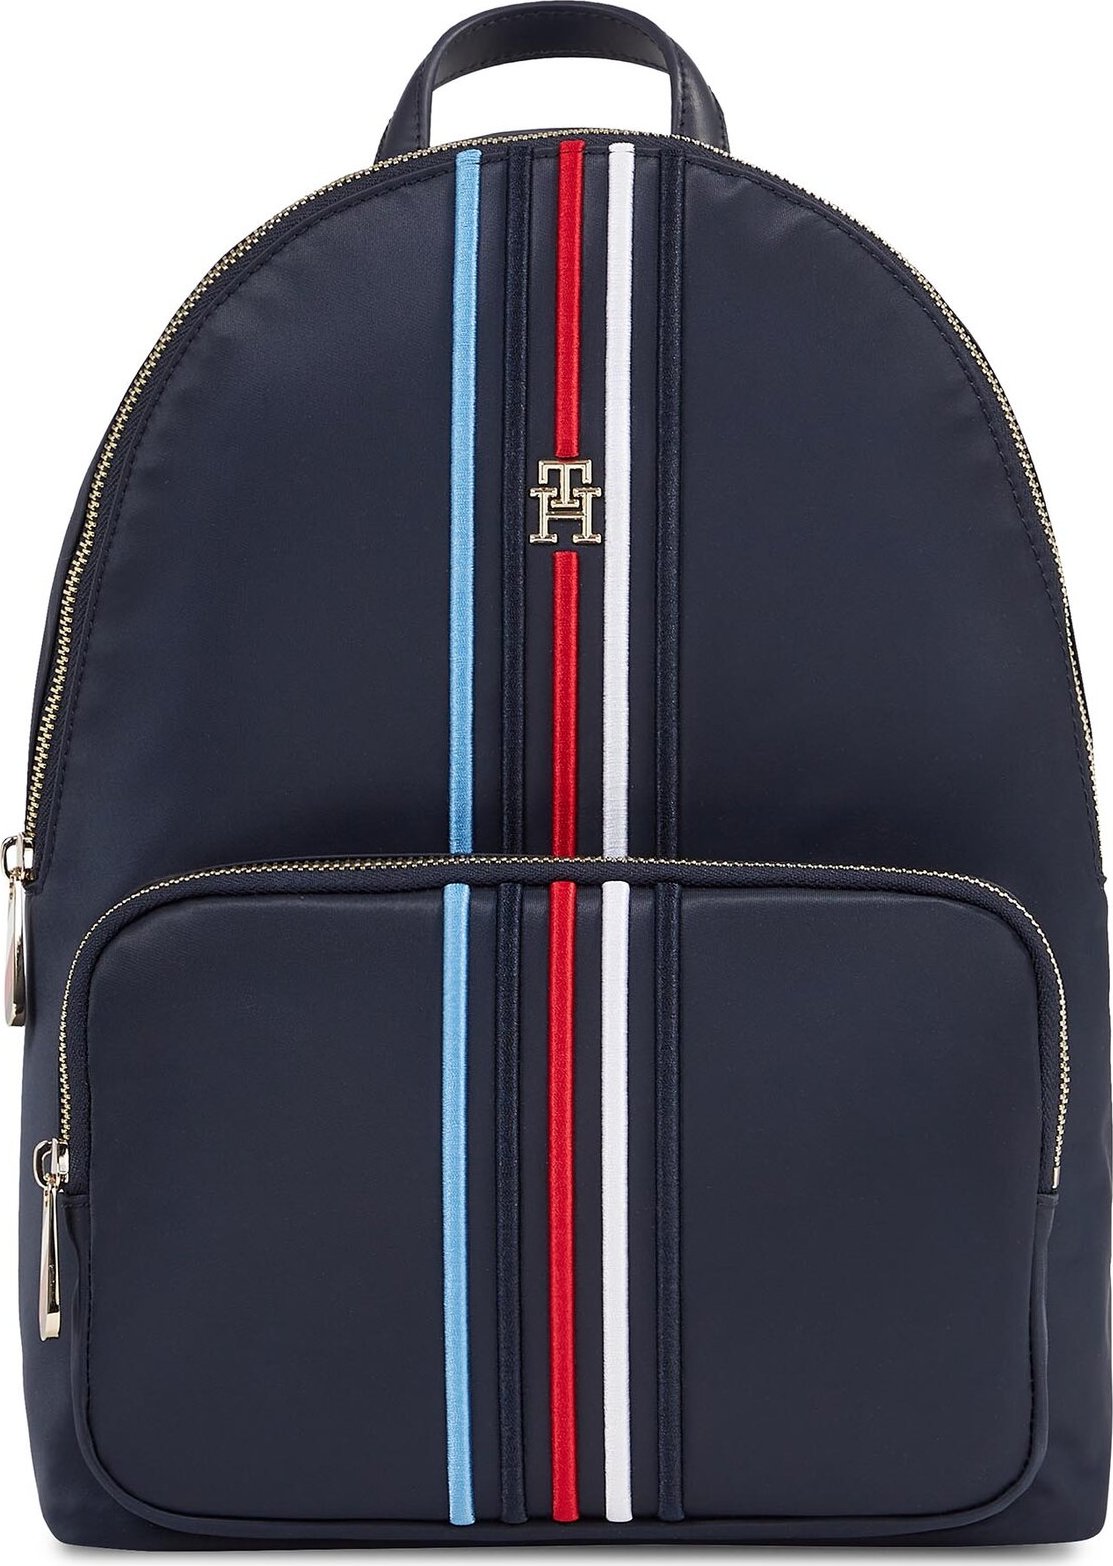 Batoh Tommy Hilfiger Poppy Backpack Corp AW0AW16116 Space Blue DW6